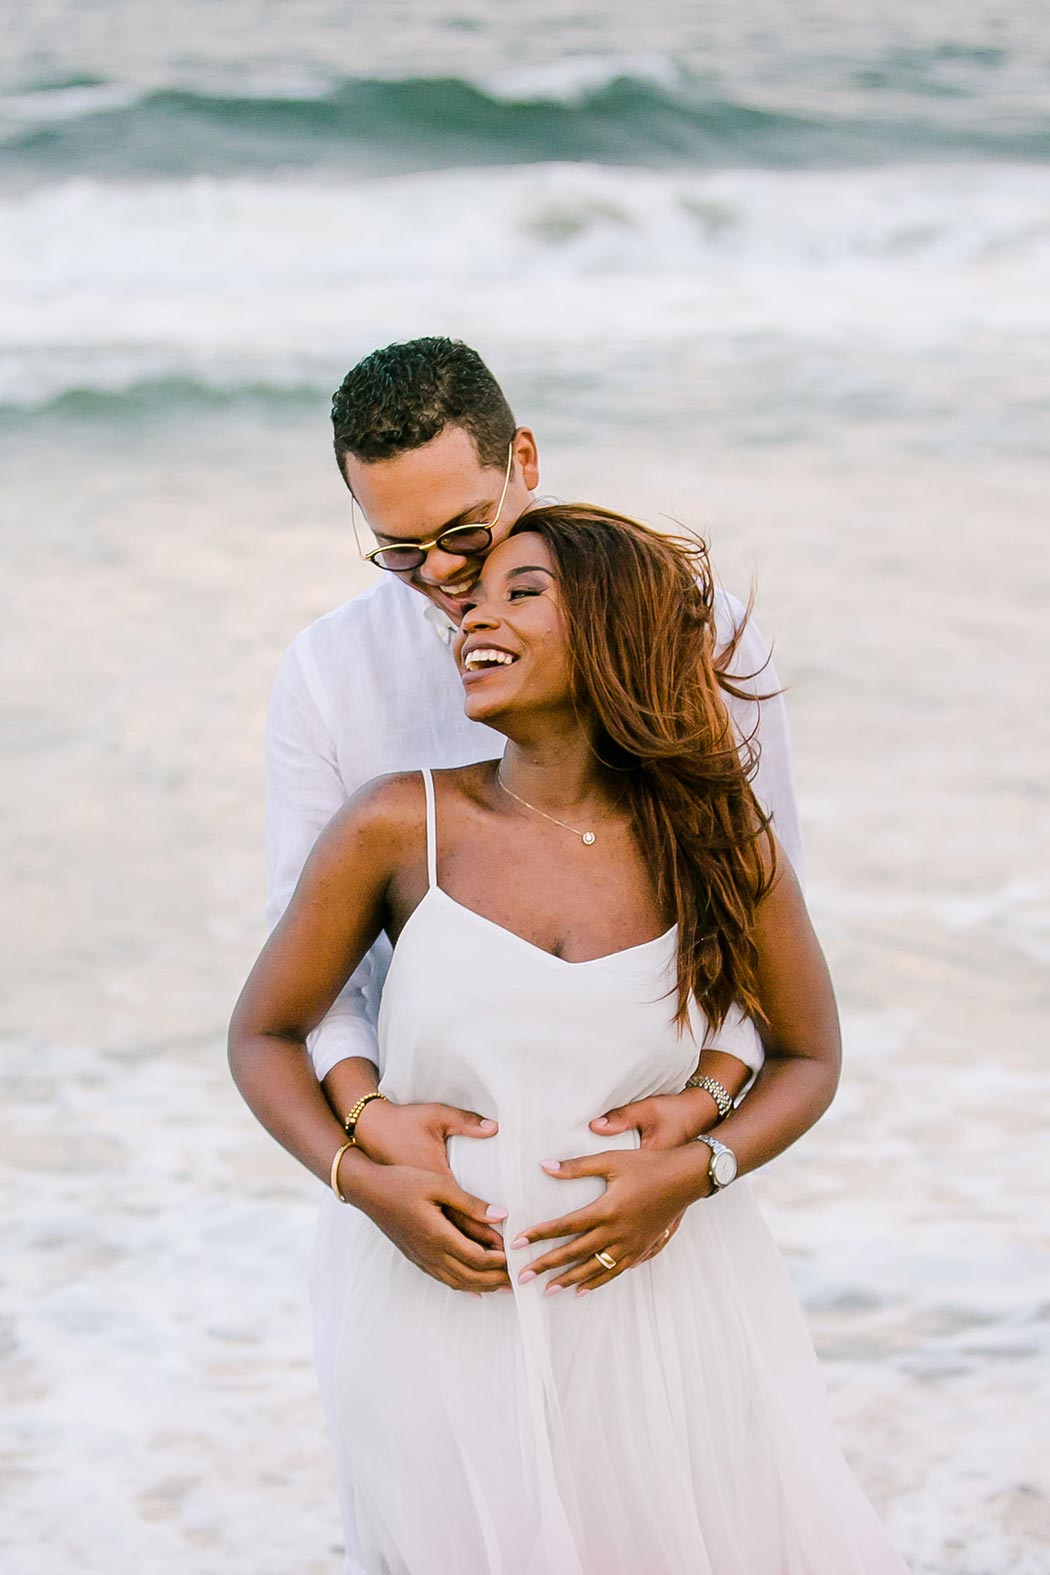 unique maternity pose for couple during maternity photoshoot on beach | fort lauderdale maternity photographer